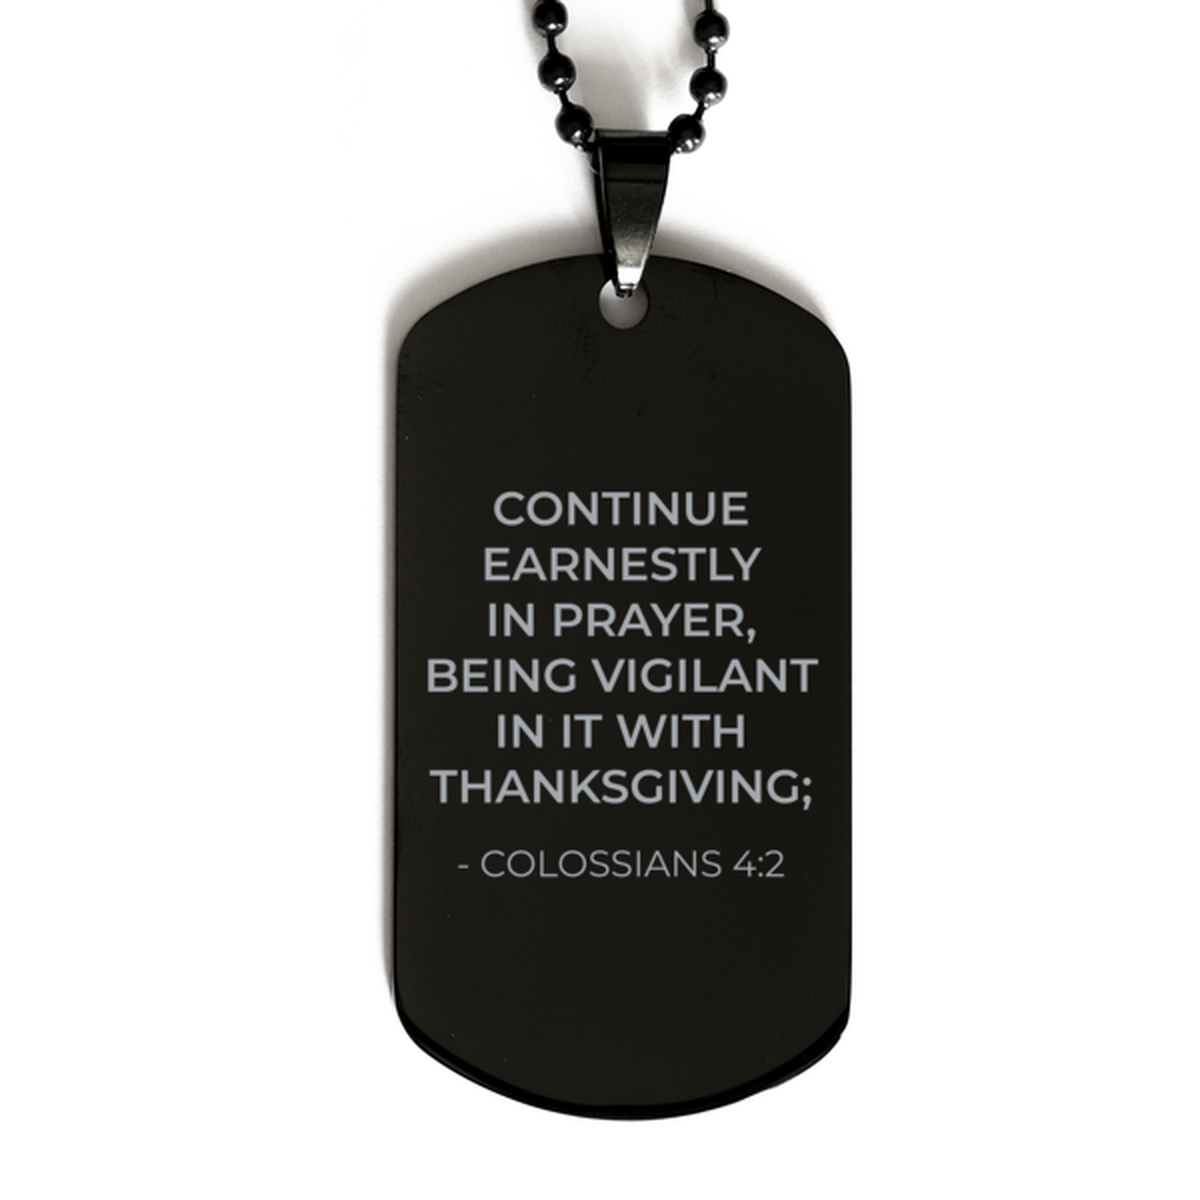 Bible Verse Black Dog Tag, Colossians 4:2 Continue Earnestly In Prayer, Being Vigilant, Christian Inspirational Necklace Gifts For Men Women